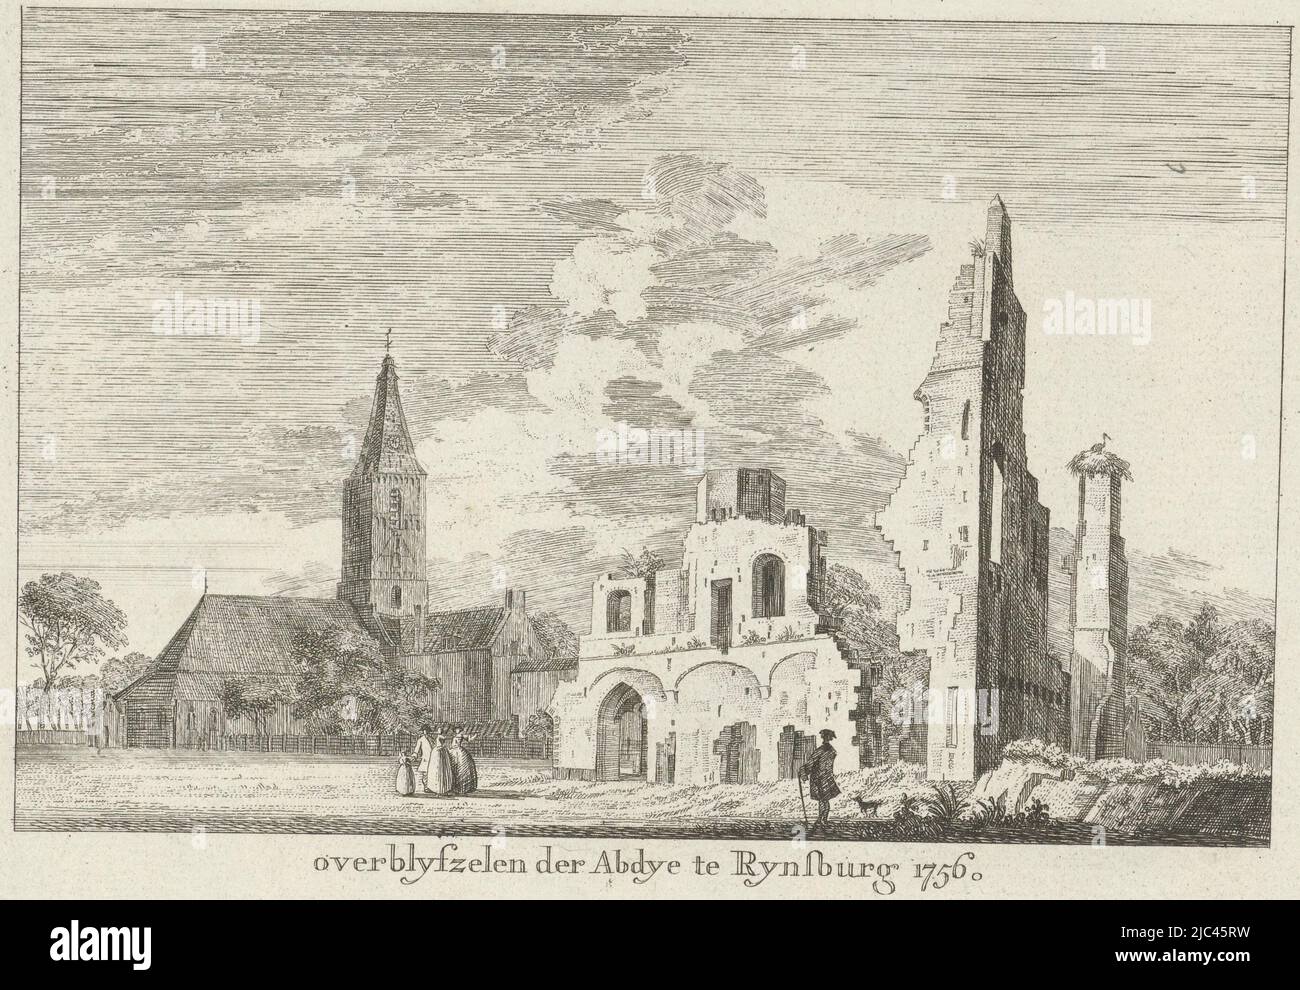 View of the abbey at Rijnsburg and the adjacent church. In the foreground on the right is a man with a dog, on the left a group of figures are looking at the ruins, Ruin of Rijnsburg Abbey, 1756 Overblyfzelen der Abdye te Rynsburg 1756 (title on object), print maker: Paulus van Liender, c. 1741 - c. 1797, paper, etching, h 143 mm × w 209 mm Stock Photo